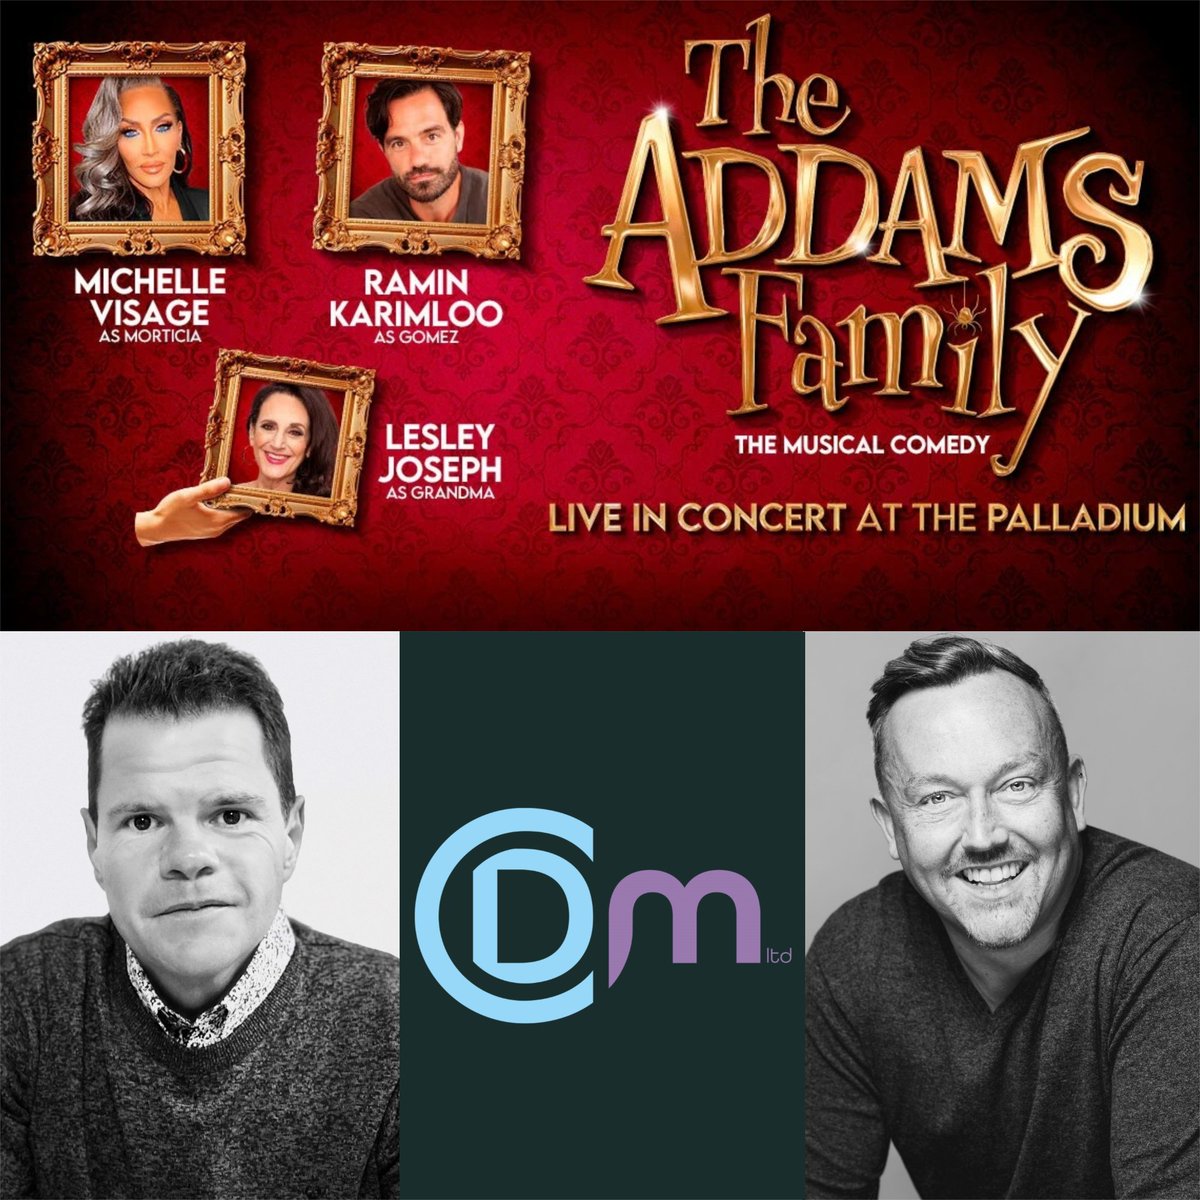 The Addams Family in Concert plays The London Palladium today and tomorrow, and features the work of creative clients BEN CRACKNELL (@bcracknell) - Lighting Design & ANDREW HILTON (@andrewhiltonmd) - Musical Direction. @LondonPalladium @AddamsFamilyUK